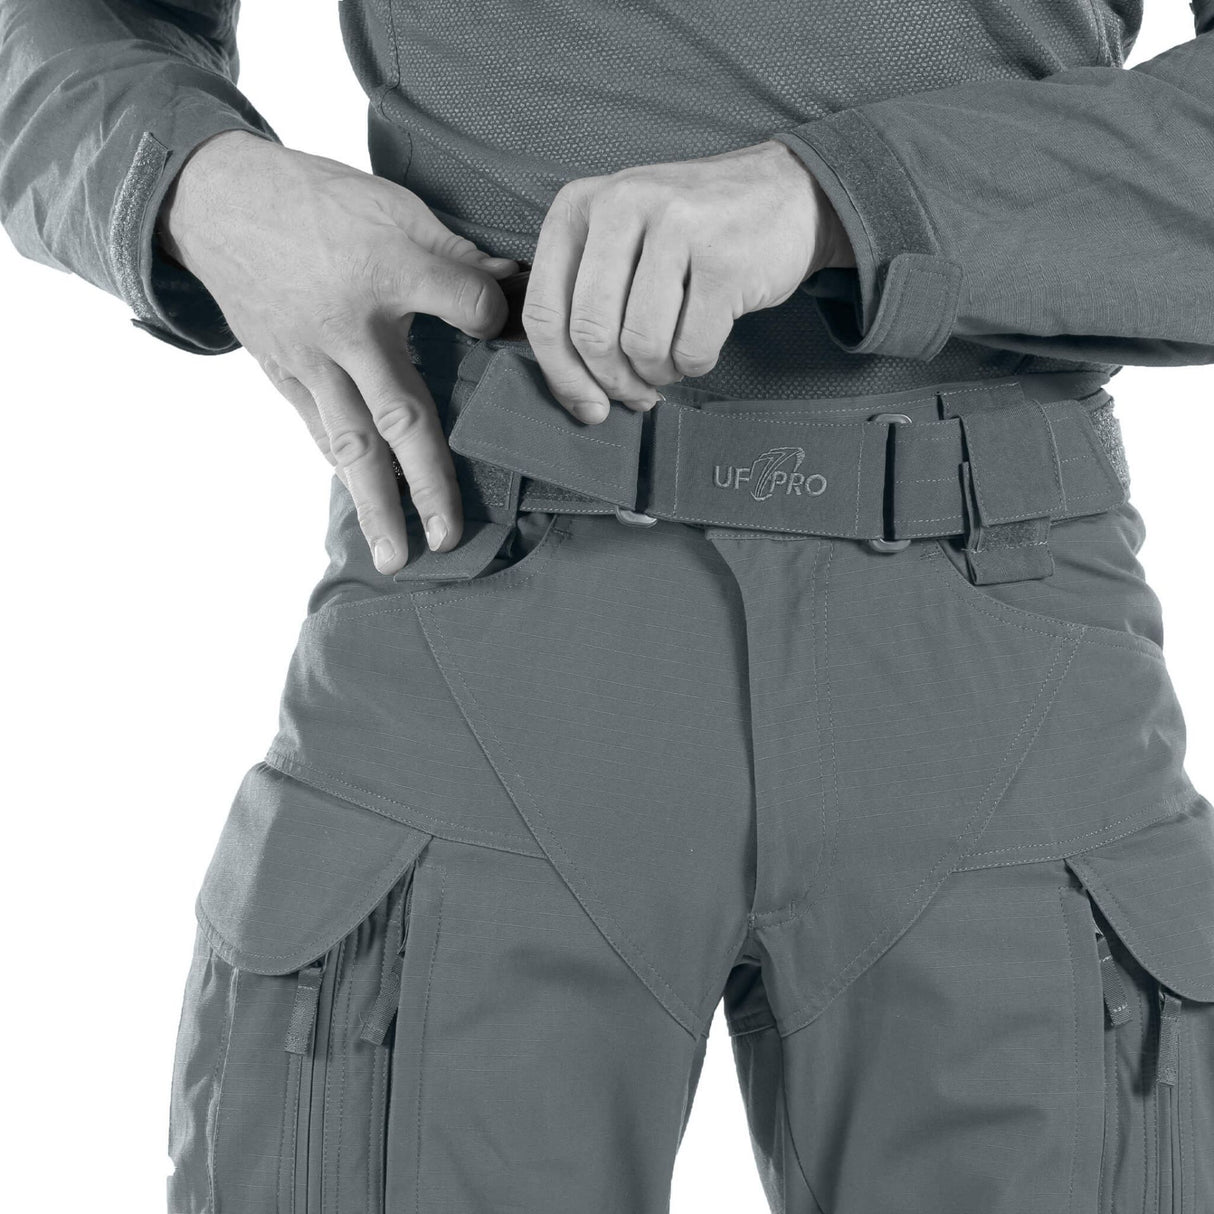 Women's Fast-Tac Urban Pant, High-Quality Tactical Gear